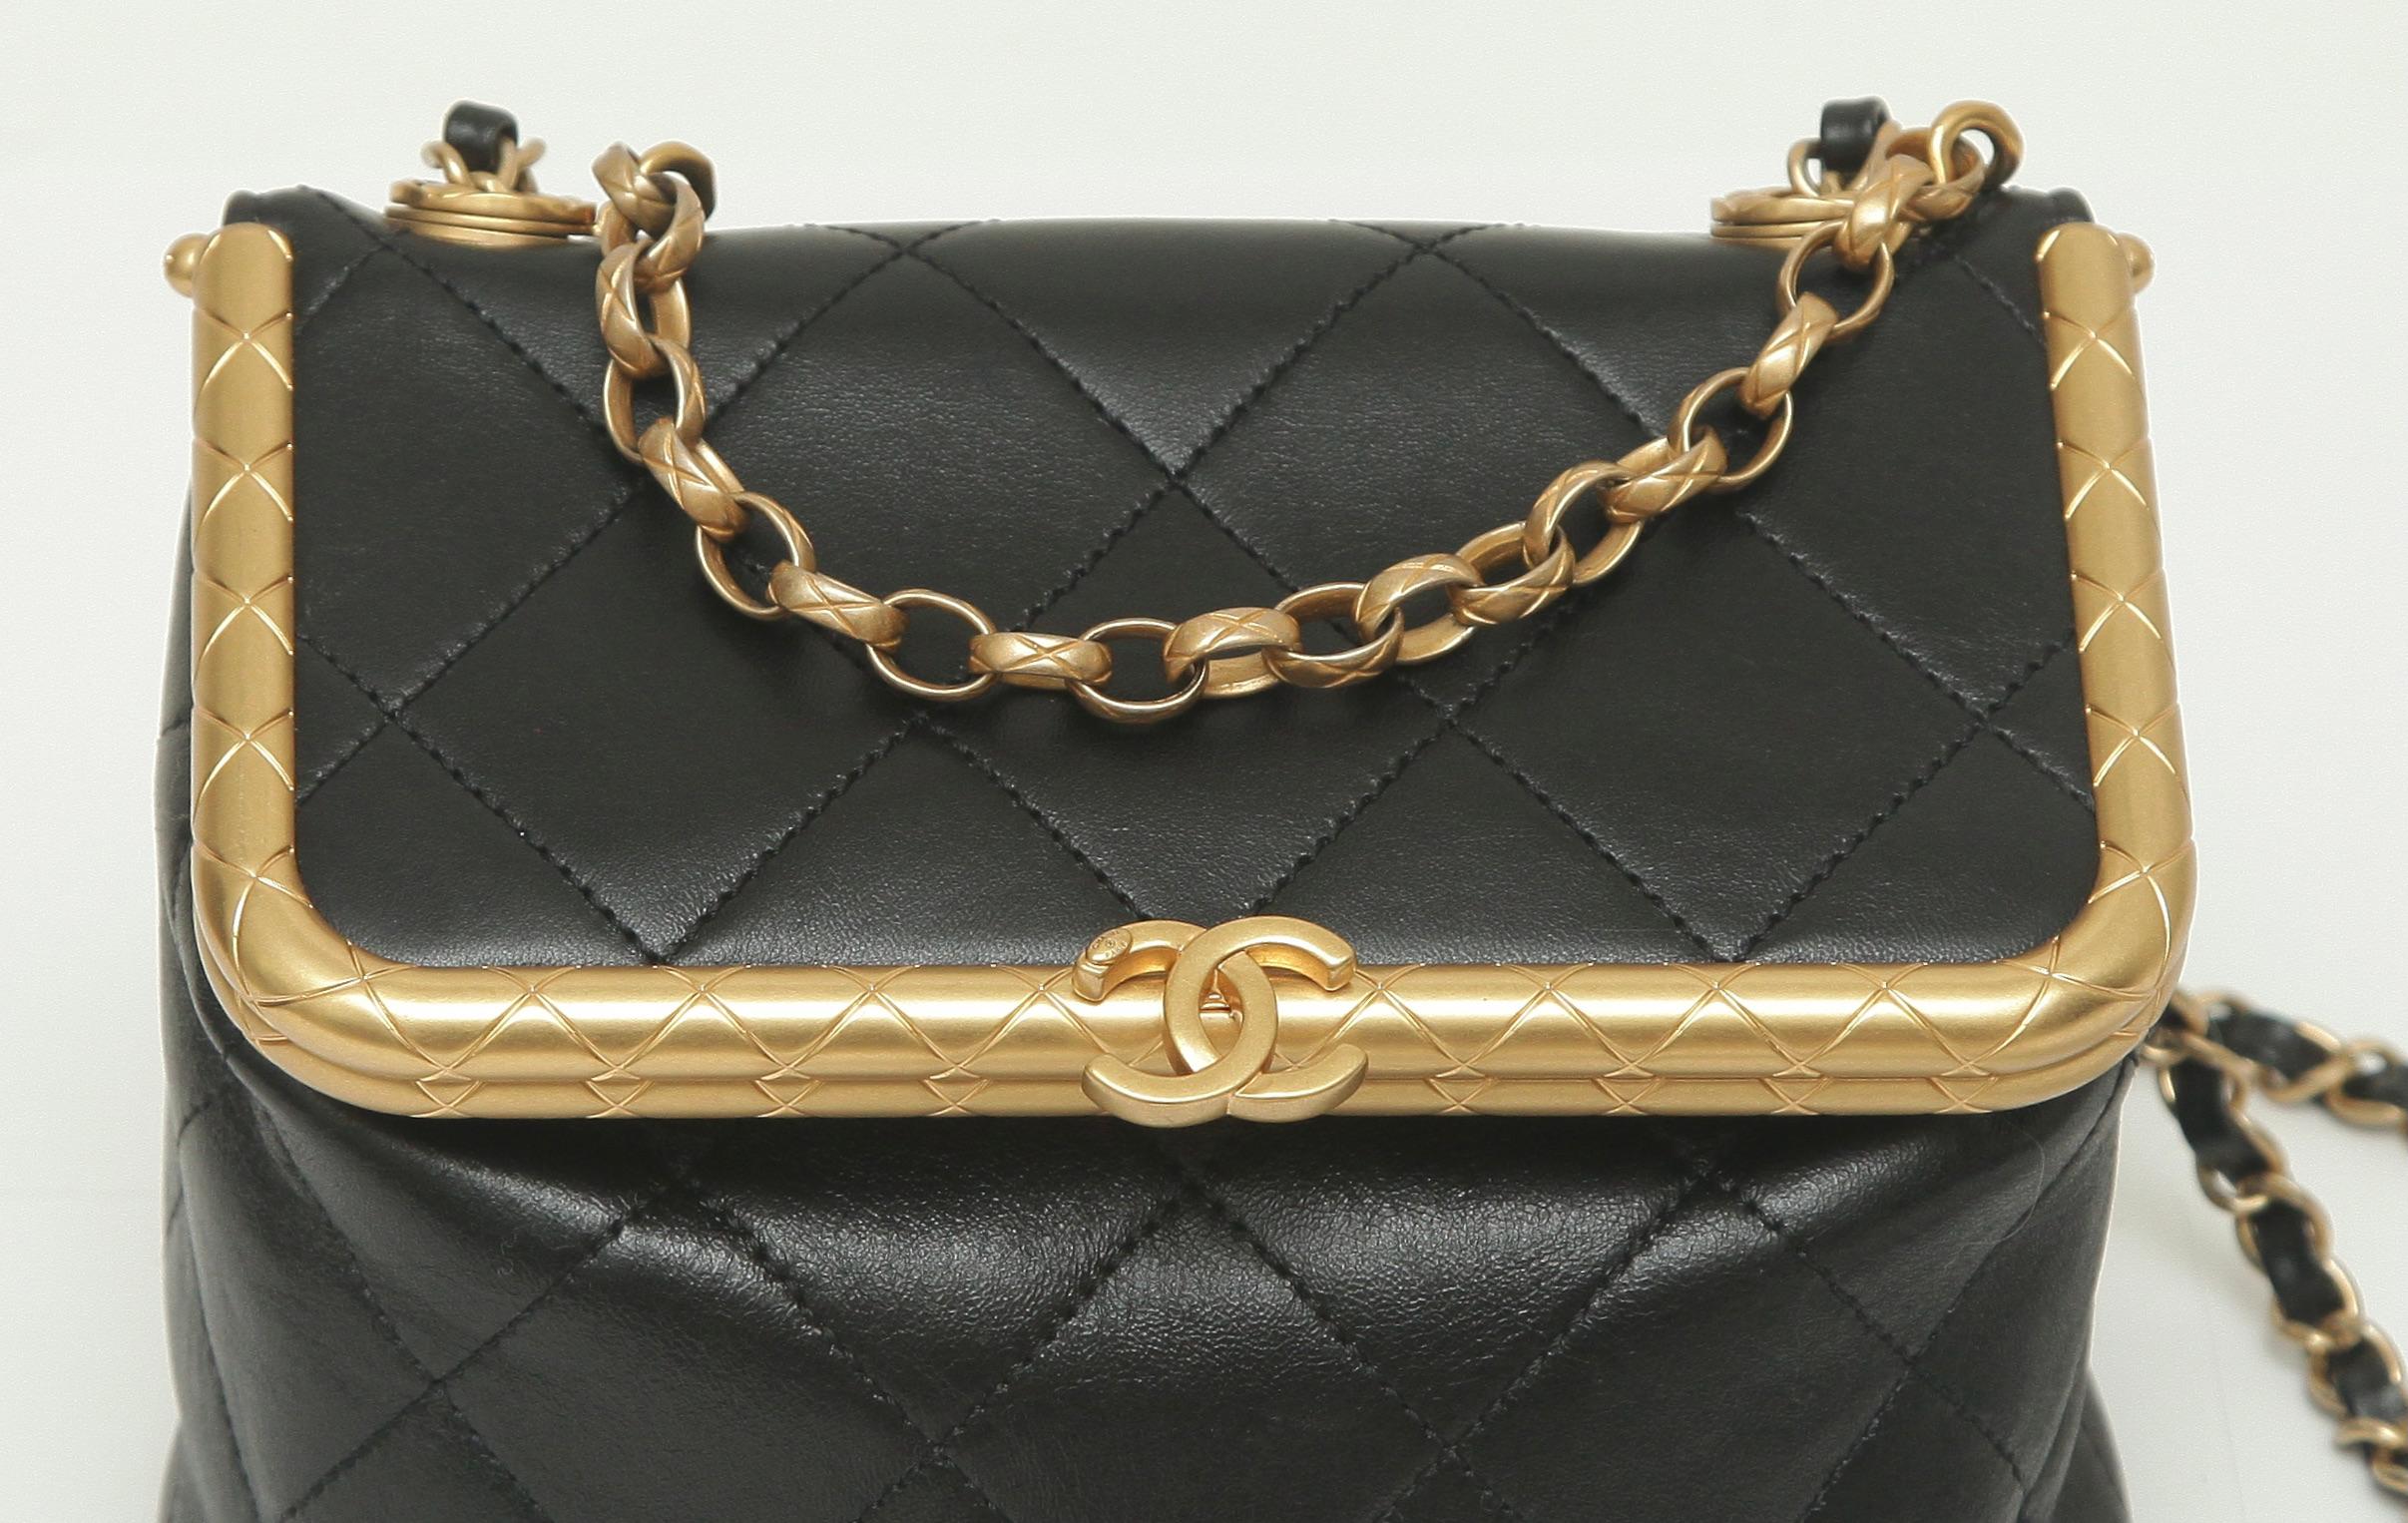 GUARANTEED AUTHENTIC CHANEL RUNWAY 20A BLACK LAMBSKIN KISS LOCK BAG

Retail excluding sales taxes $5,200.


Details:
- Black lambskin diamond quilted leather exterior.
- Matte gold hardware.
- Kiss lock closure.Gold chain and navy leather shoulder